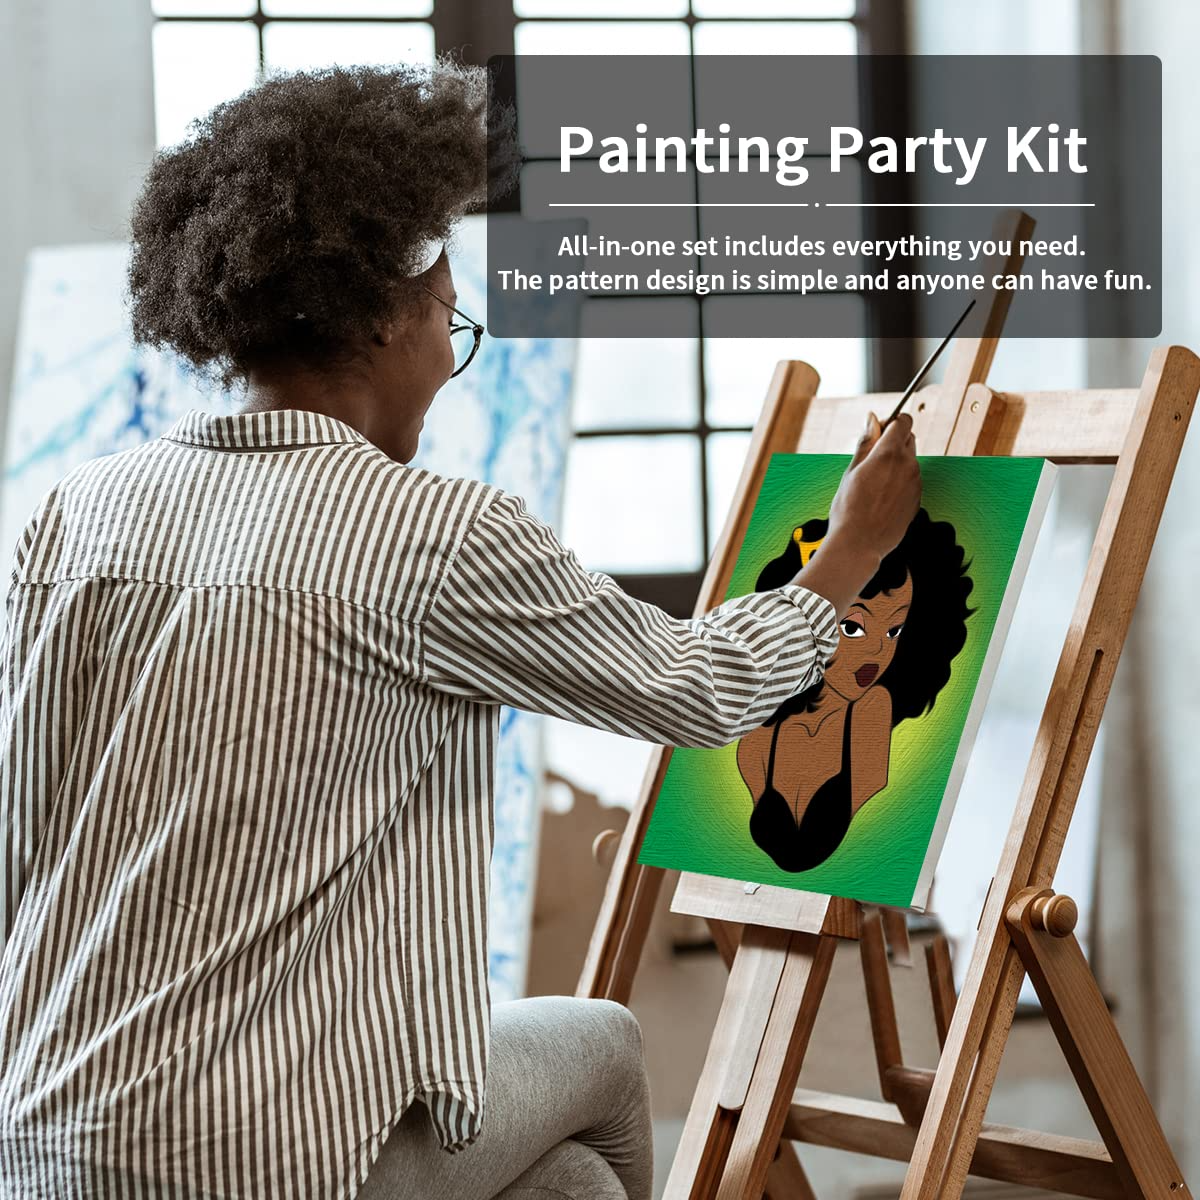 After Dinner - Canvas Painting Kit for Adults